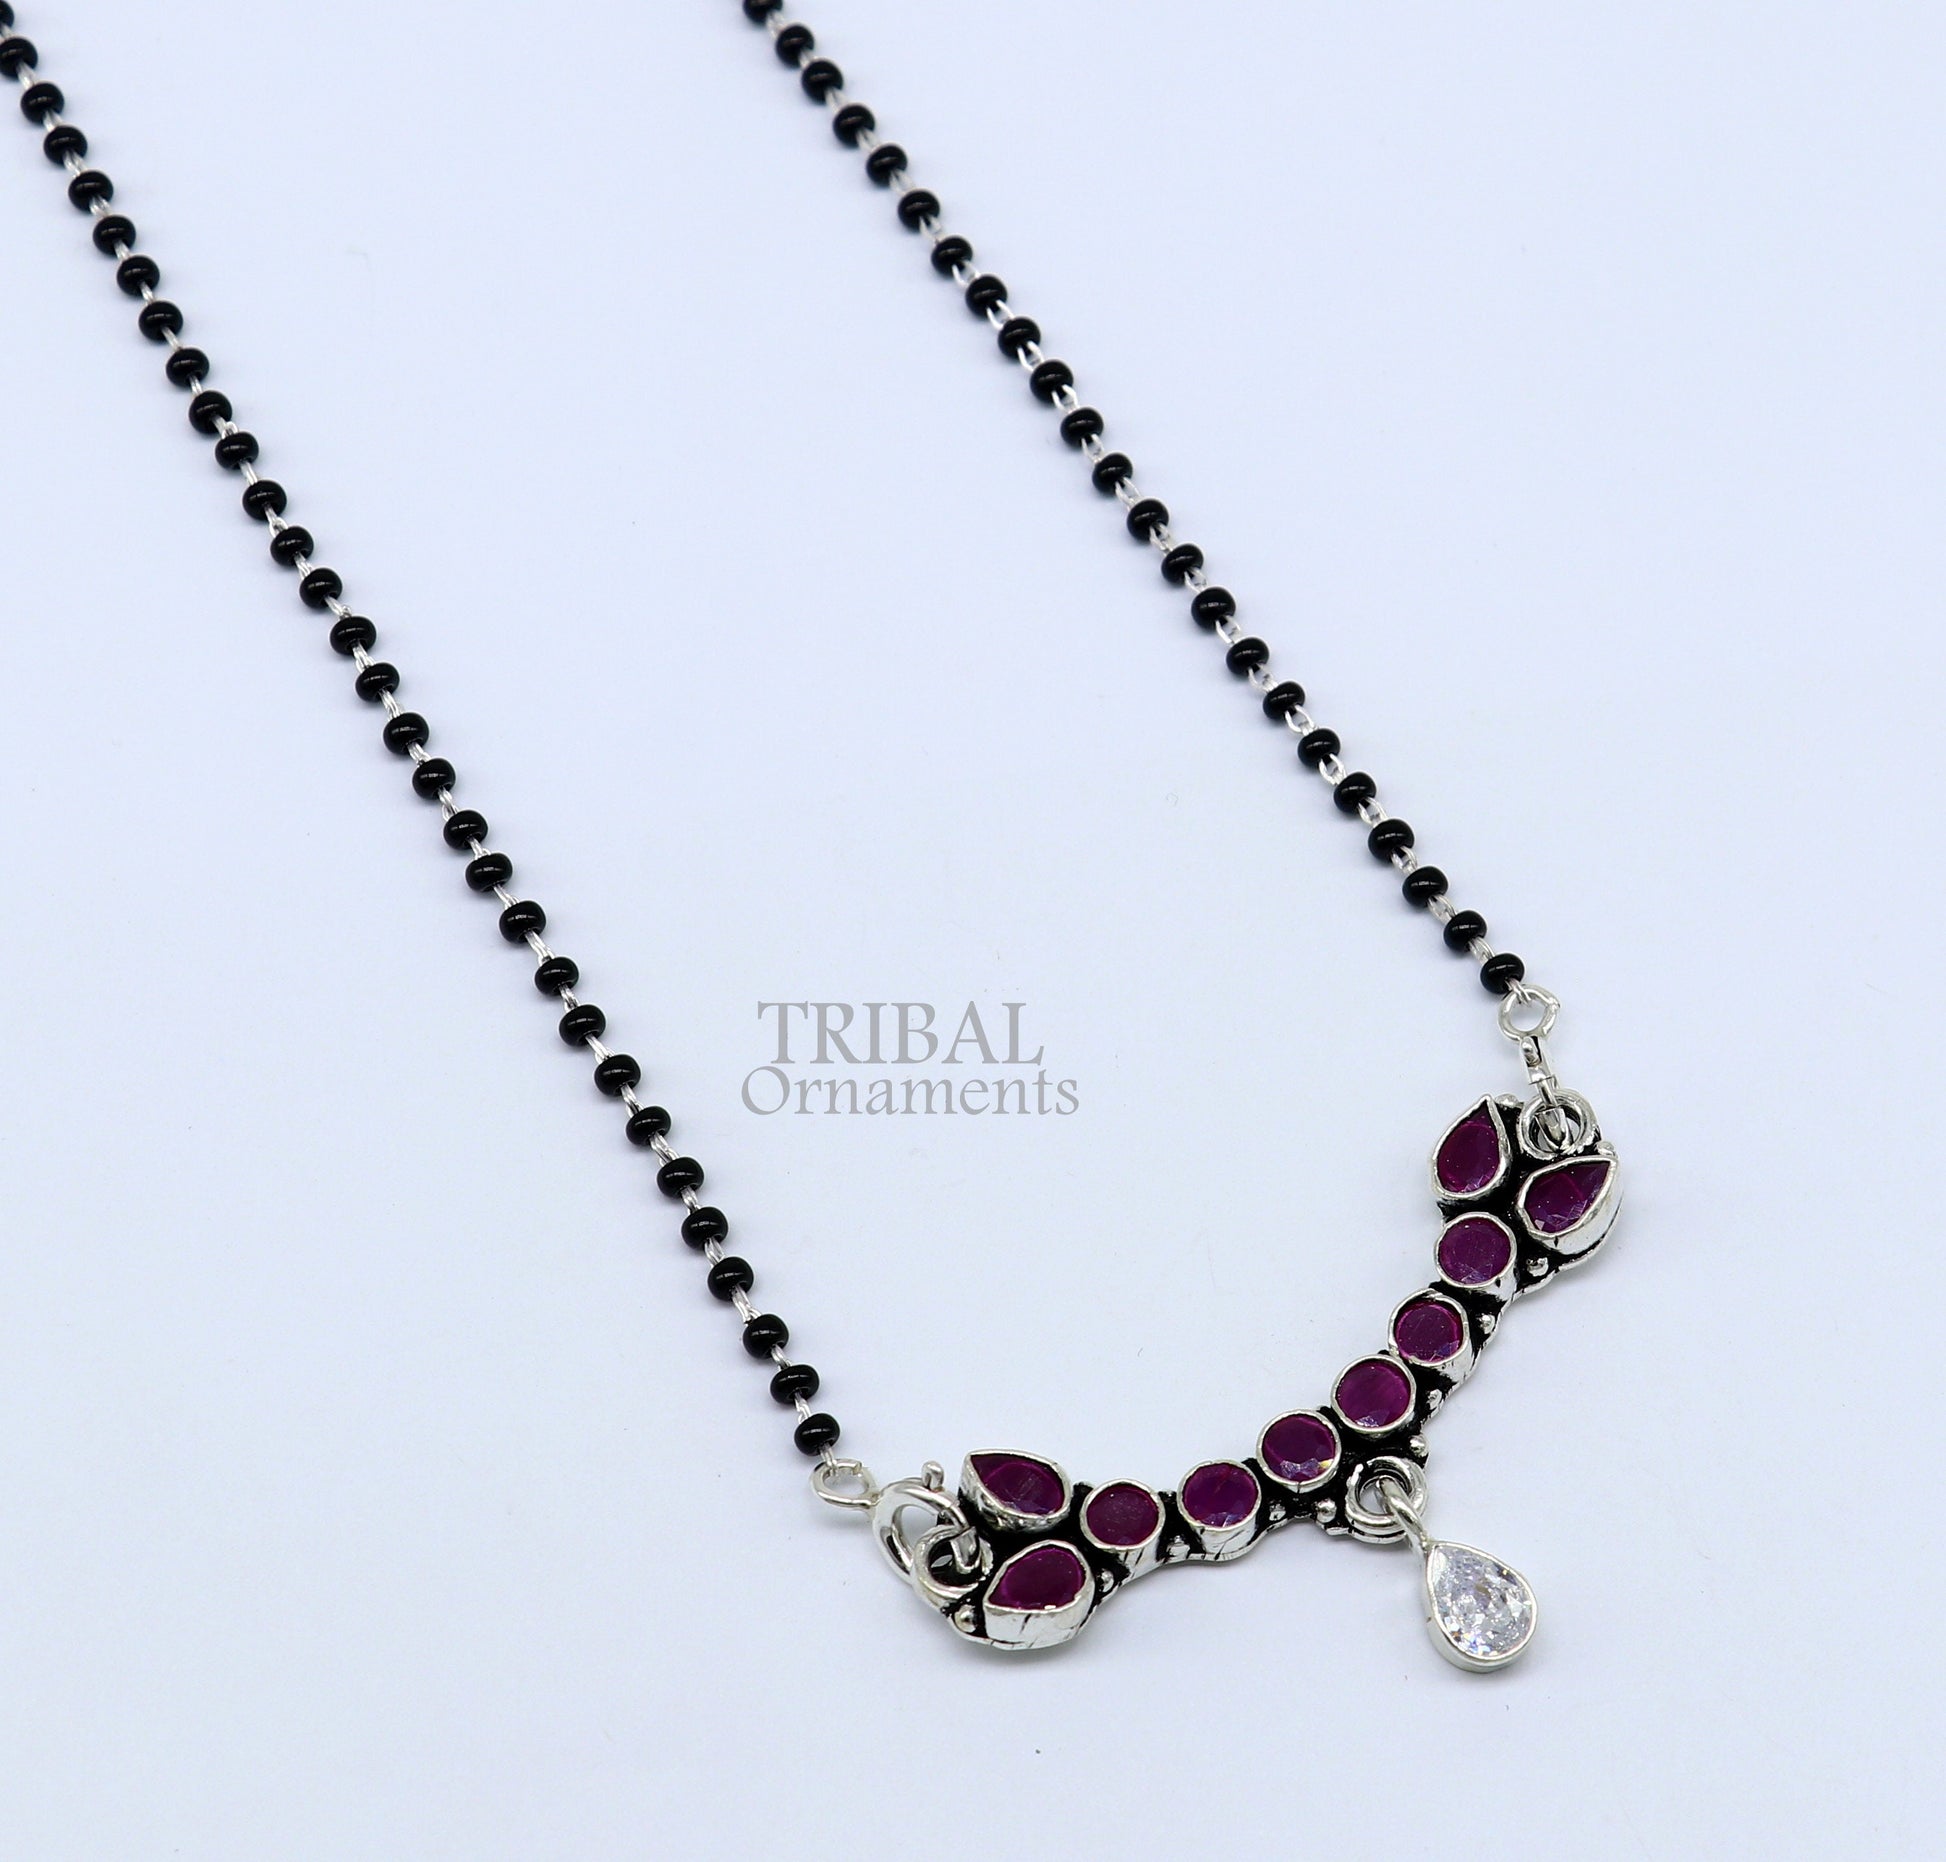 Trendy Red cut stone mangalsutra pendant 925 sterling silver black beads chain necklace, traditional style brides Mangalsutra necklace ms15 - TRIBAL ORNAMENTS